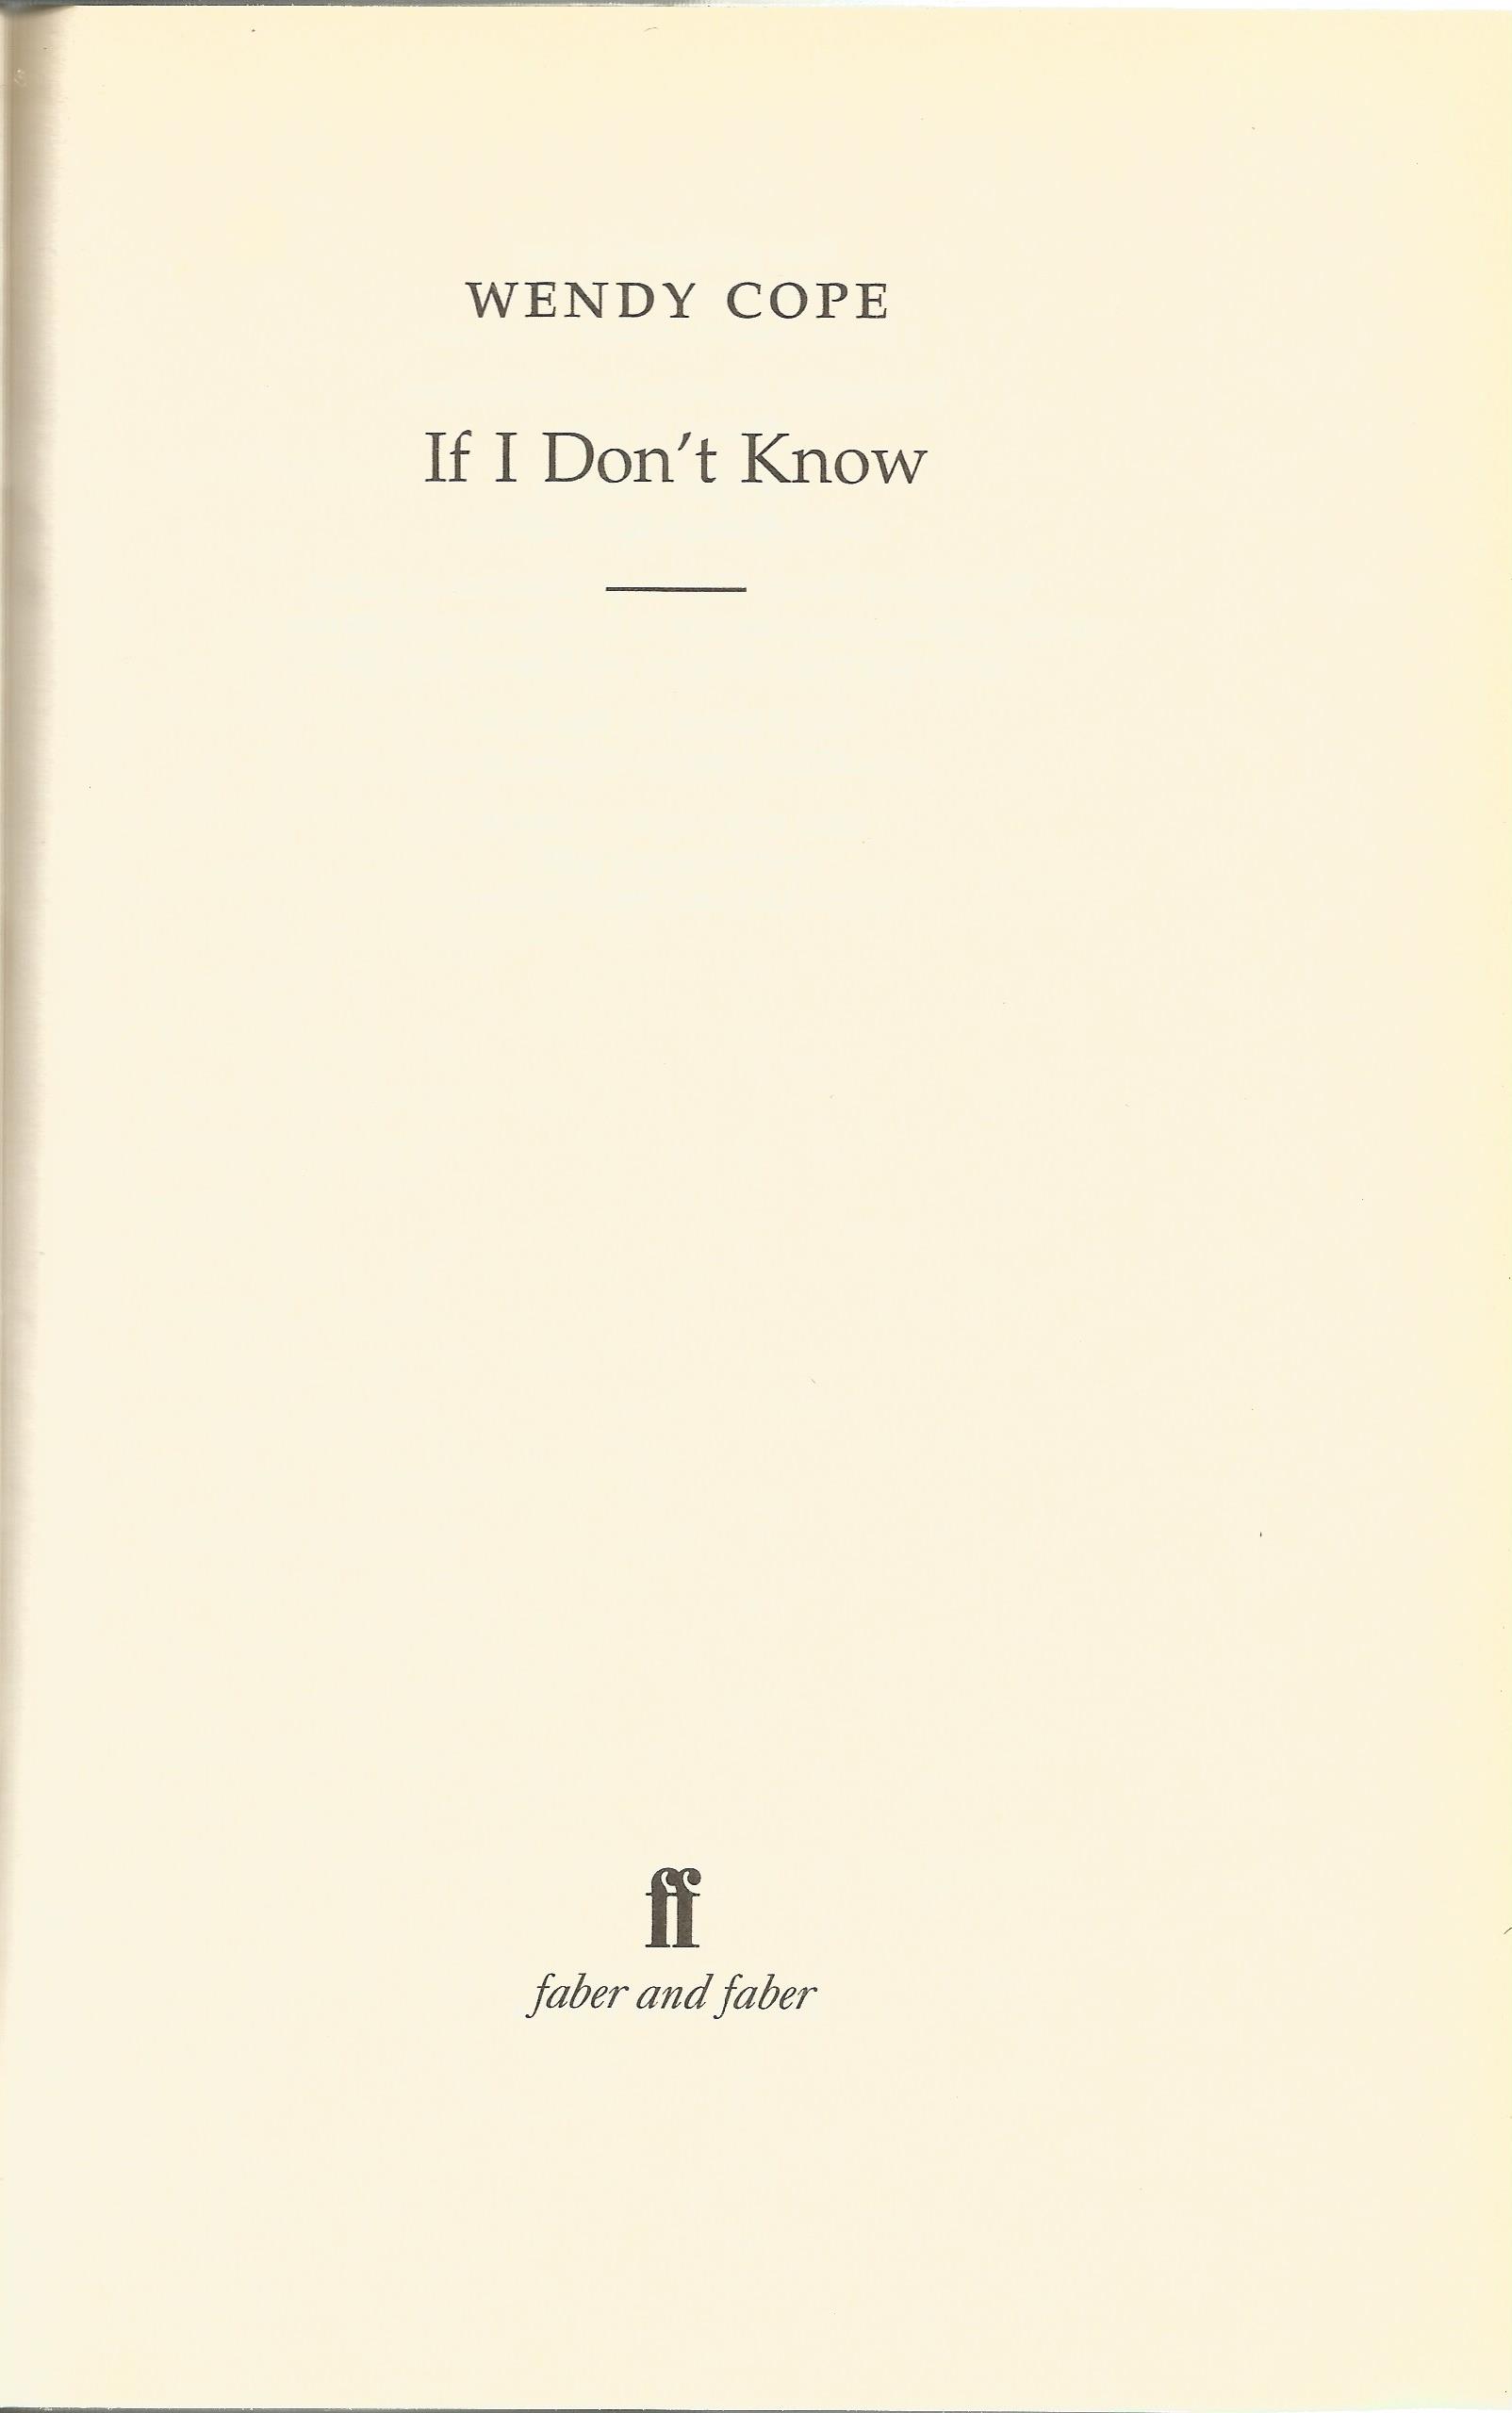 If I Don't Know by Wendy Cope Hardback Book 2001 First Edition published by Faber and Faber Ltd some - Image 2 of 3